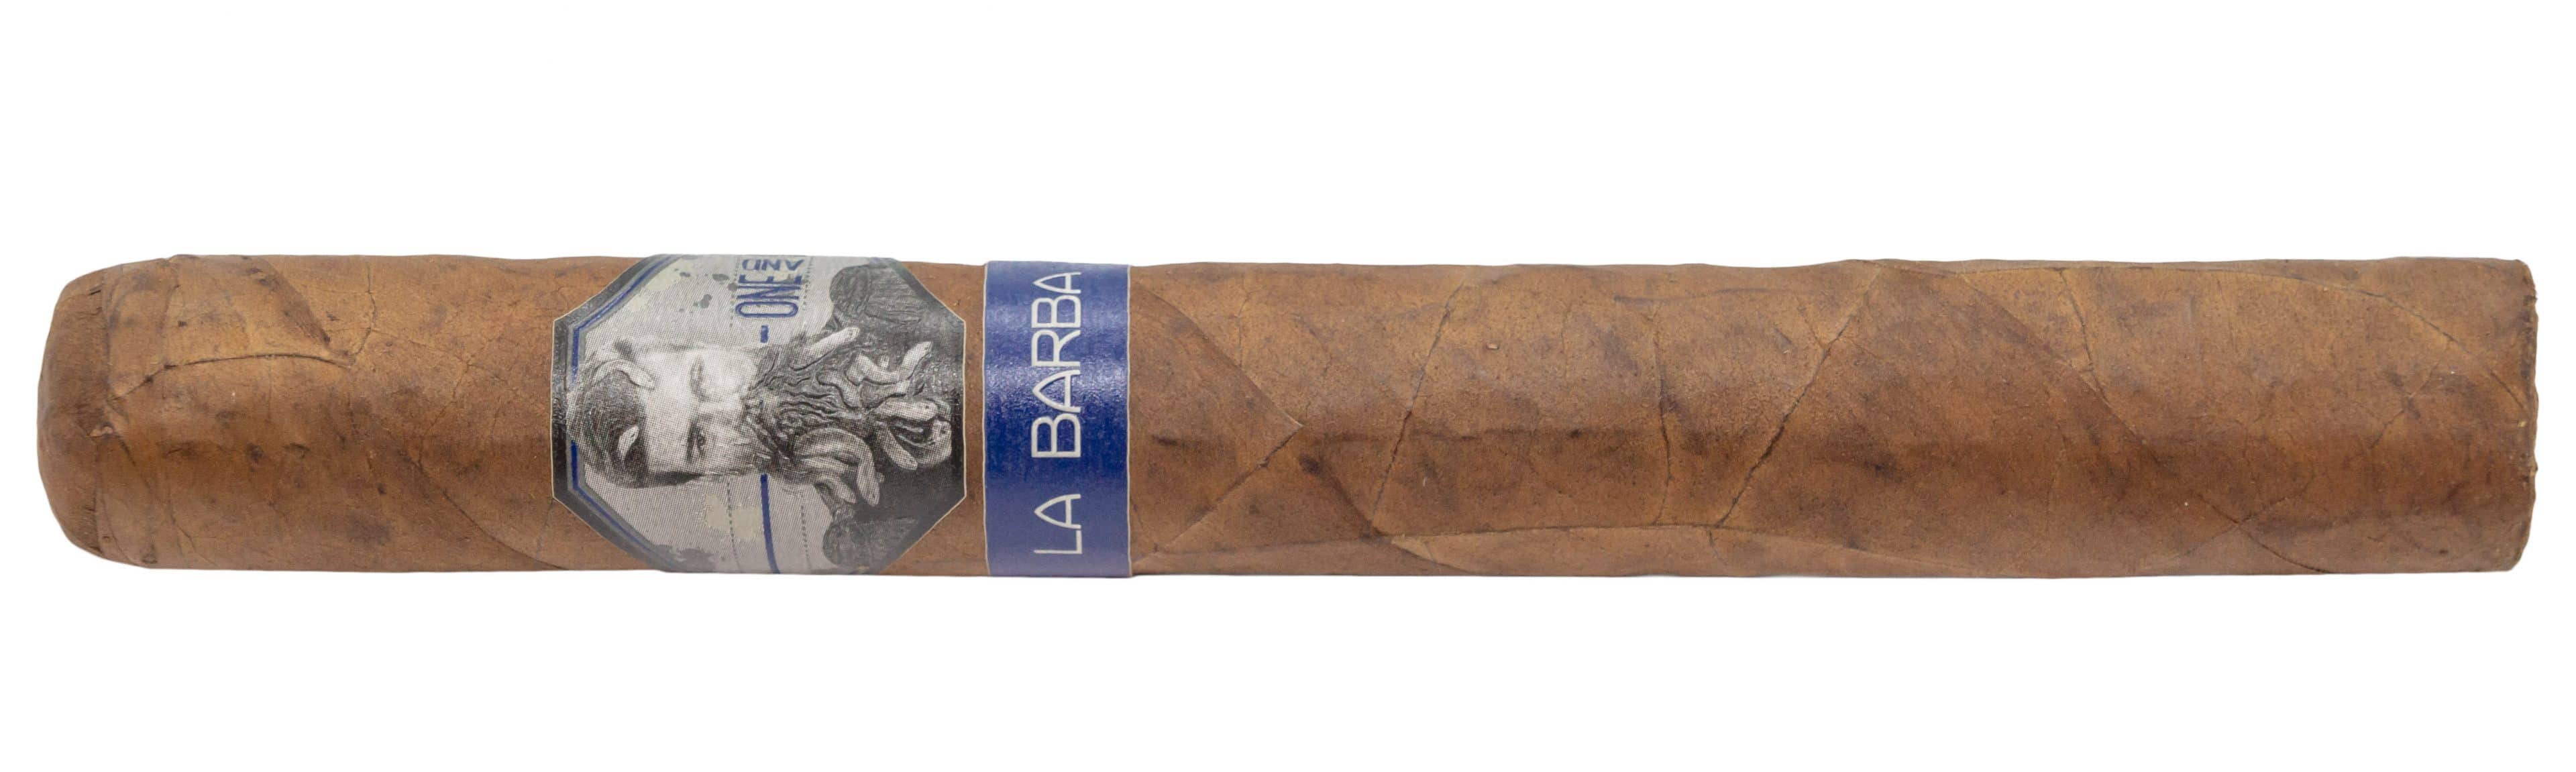 Blind Cigar Review: La Barba | One and Only 2018